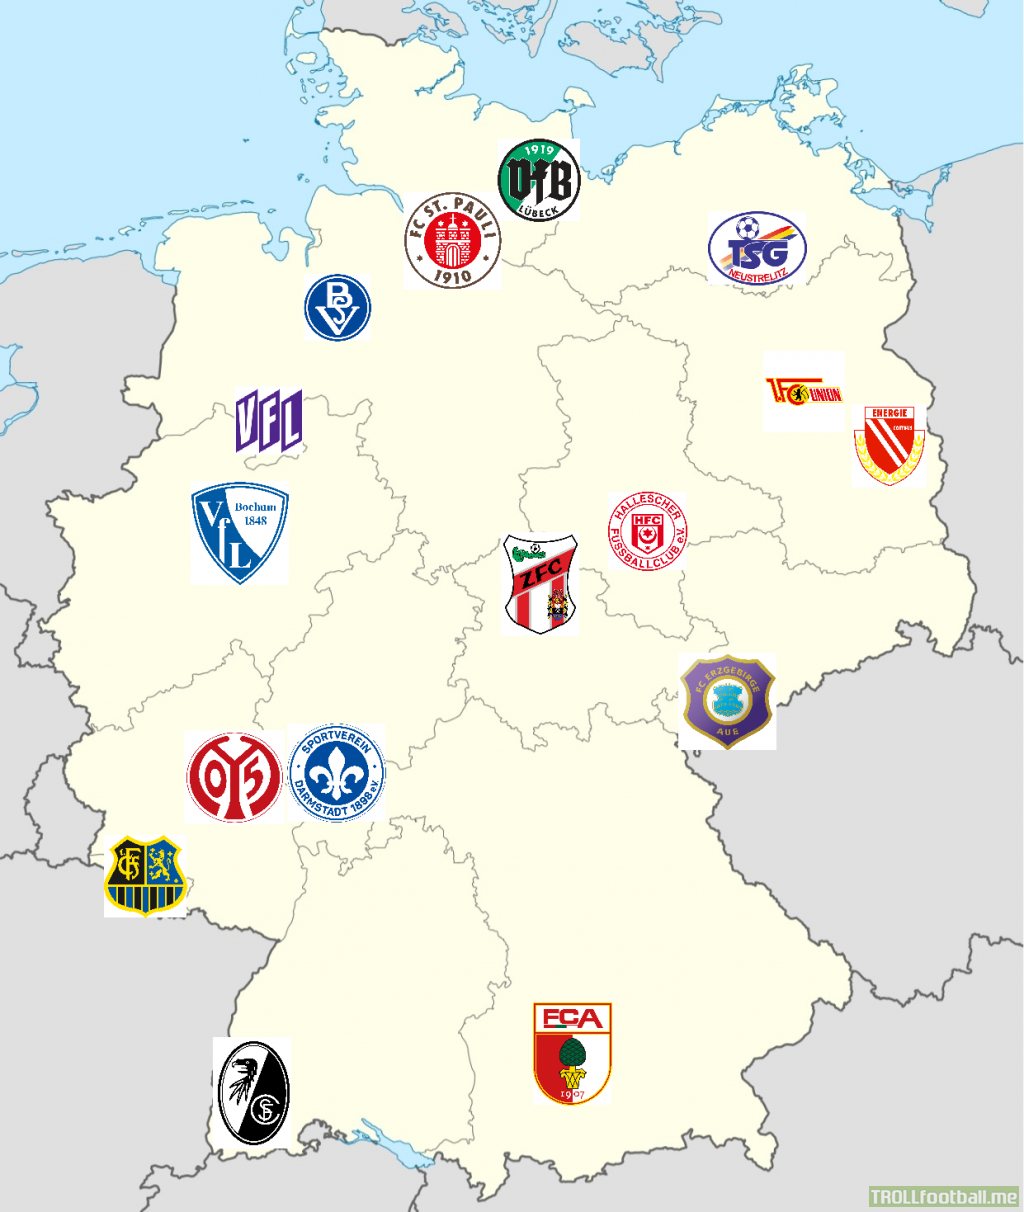 (Realigned Map) Biggest club by members that has never been champions of a German top flight division for each state